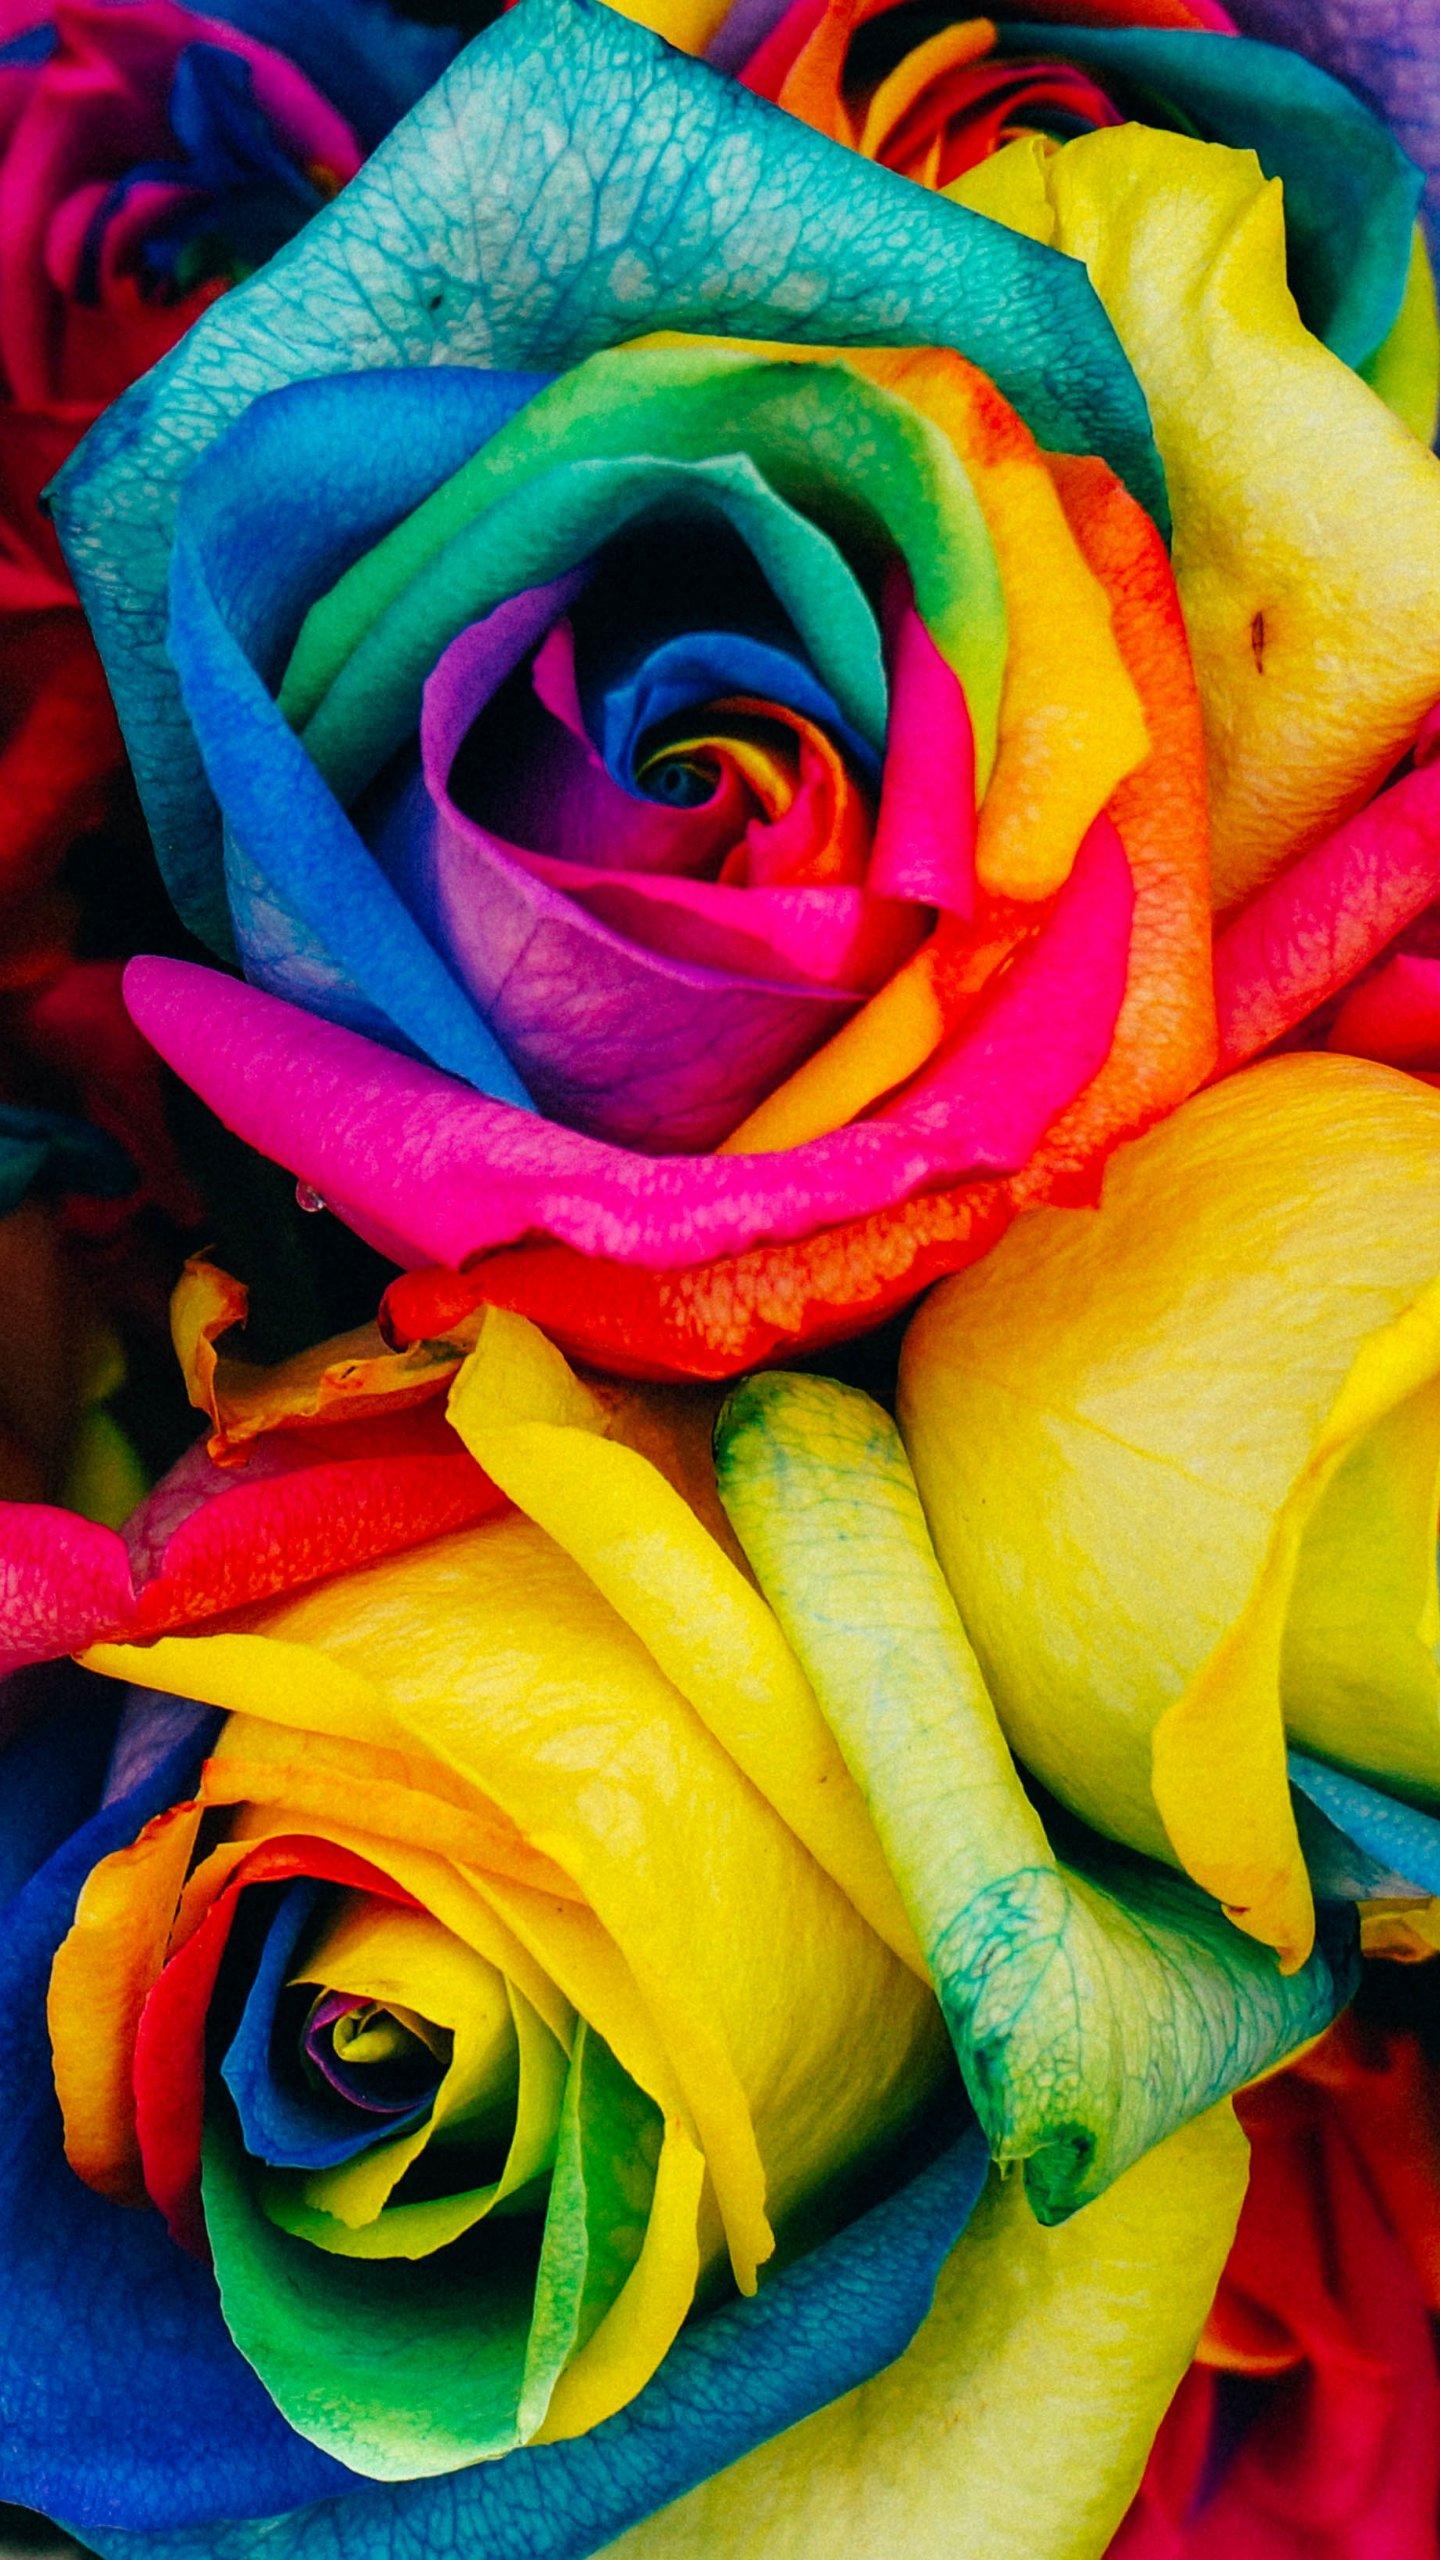 Rainbow Roses Wallpaper, Android & Desktop Background